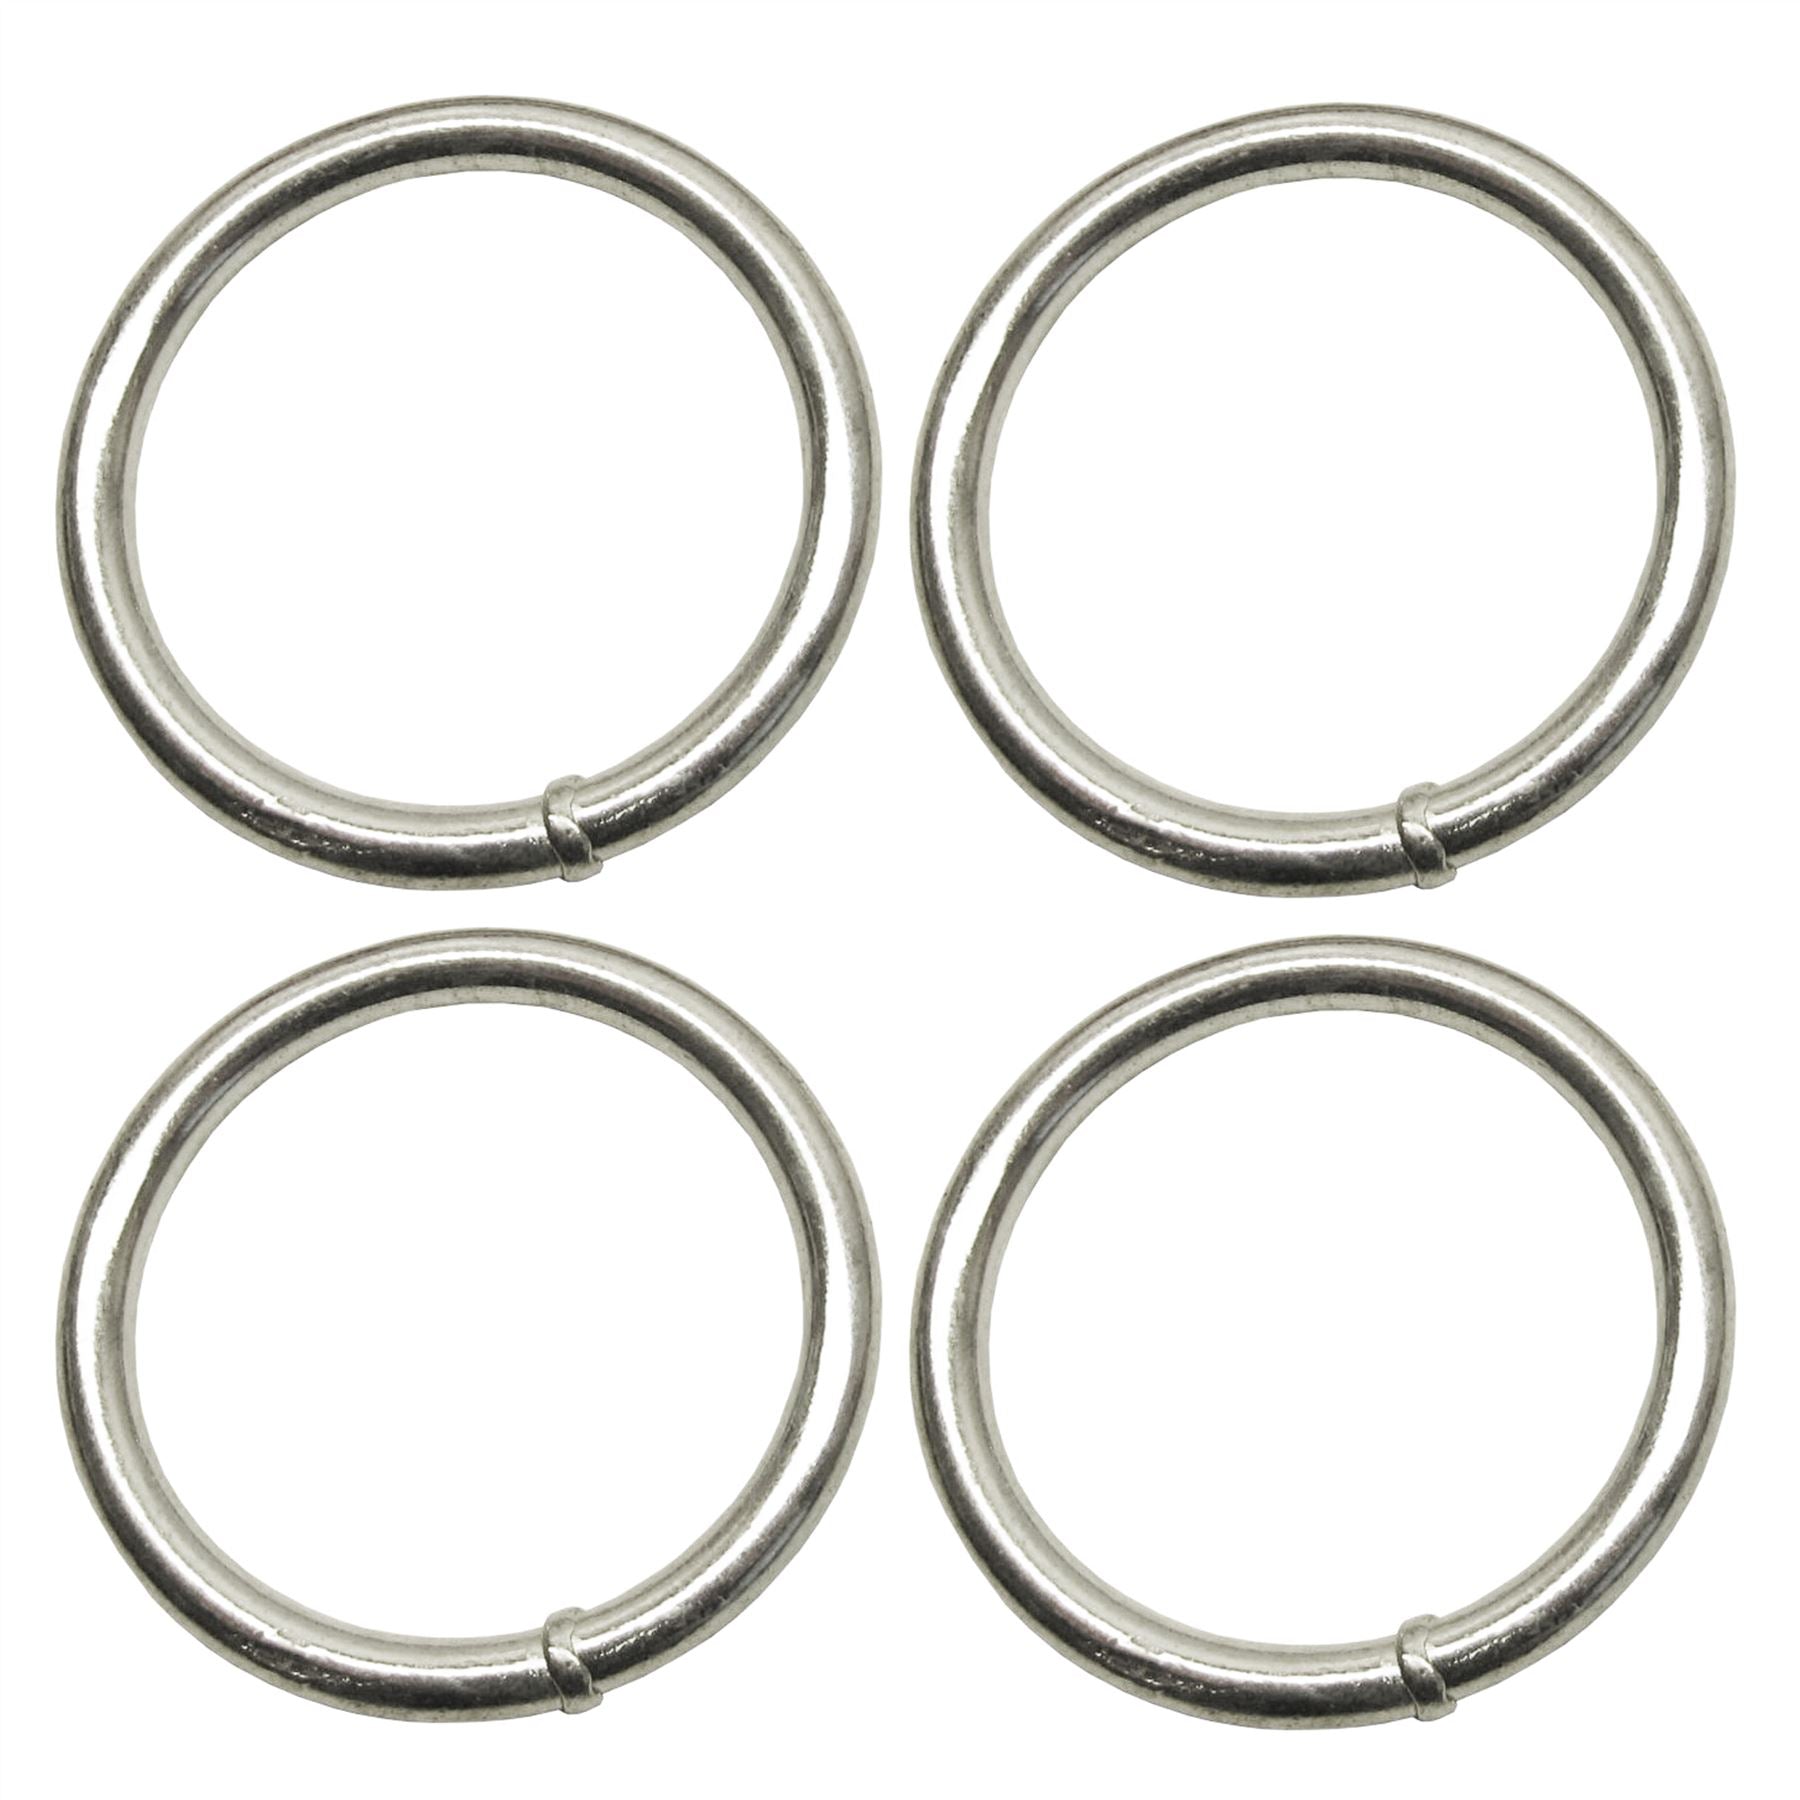 5mm x 40mm Steel Round O Rings Welded Zinc Plated 4 PACK DK38